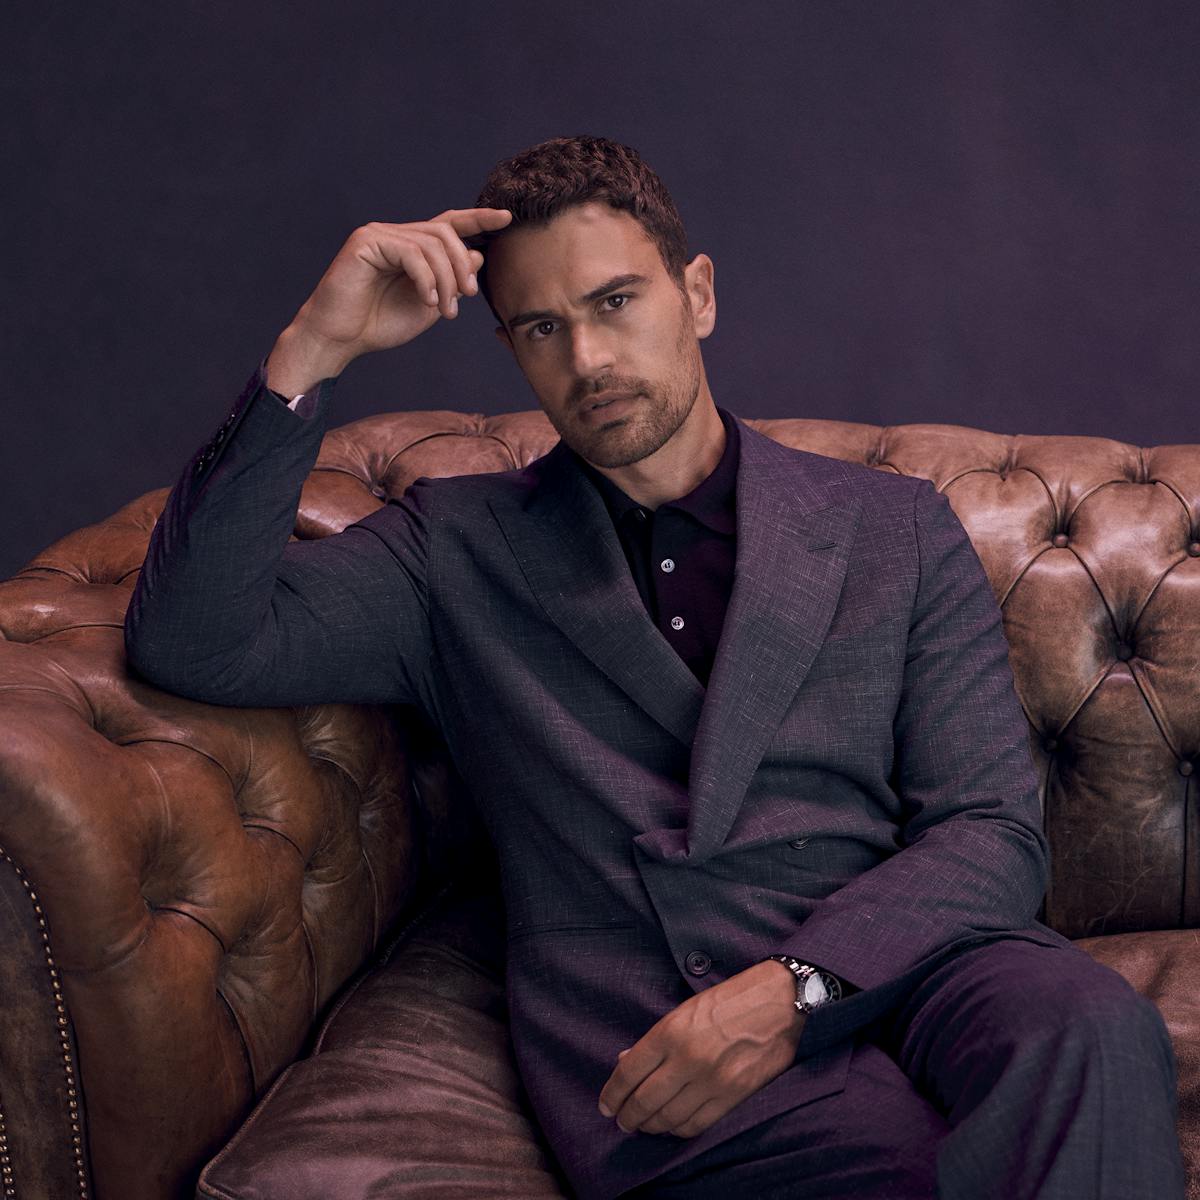 Theo James wears a purple suit and sits on a brown leather couch.